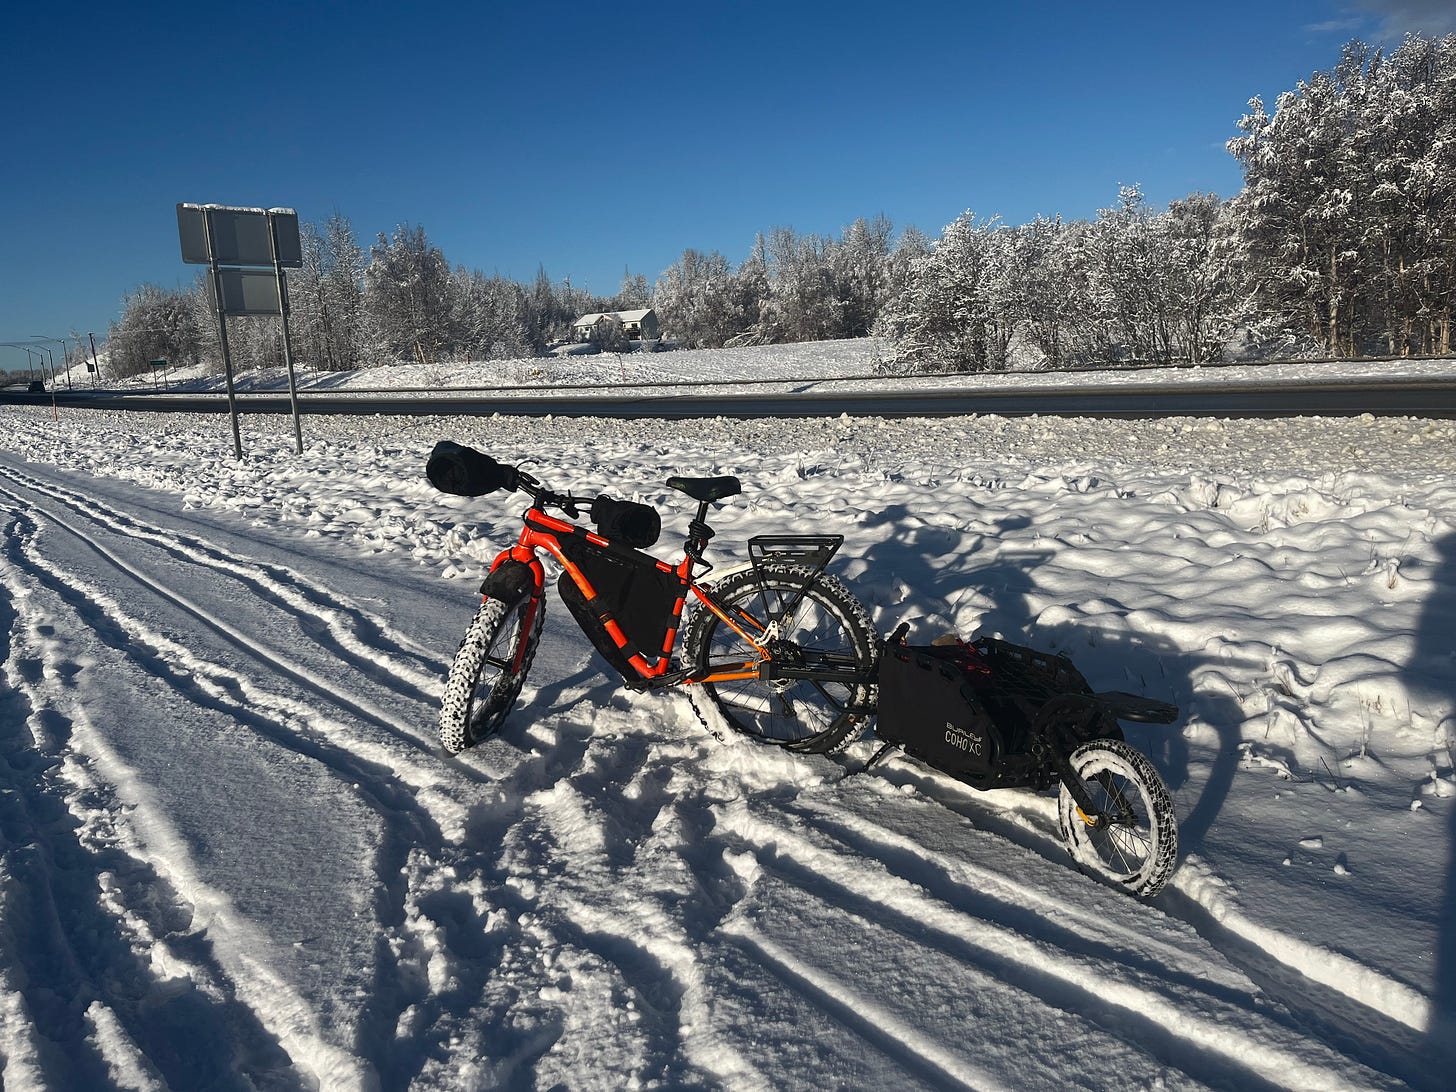 Orange fat tire bike parked in snow with a trailer and a deep blue sky